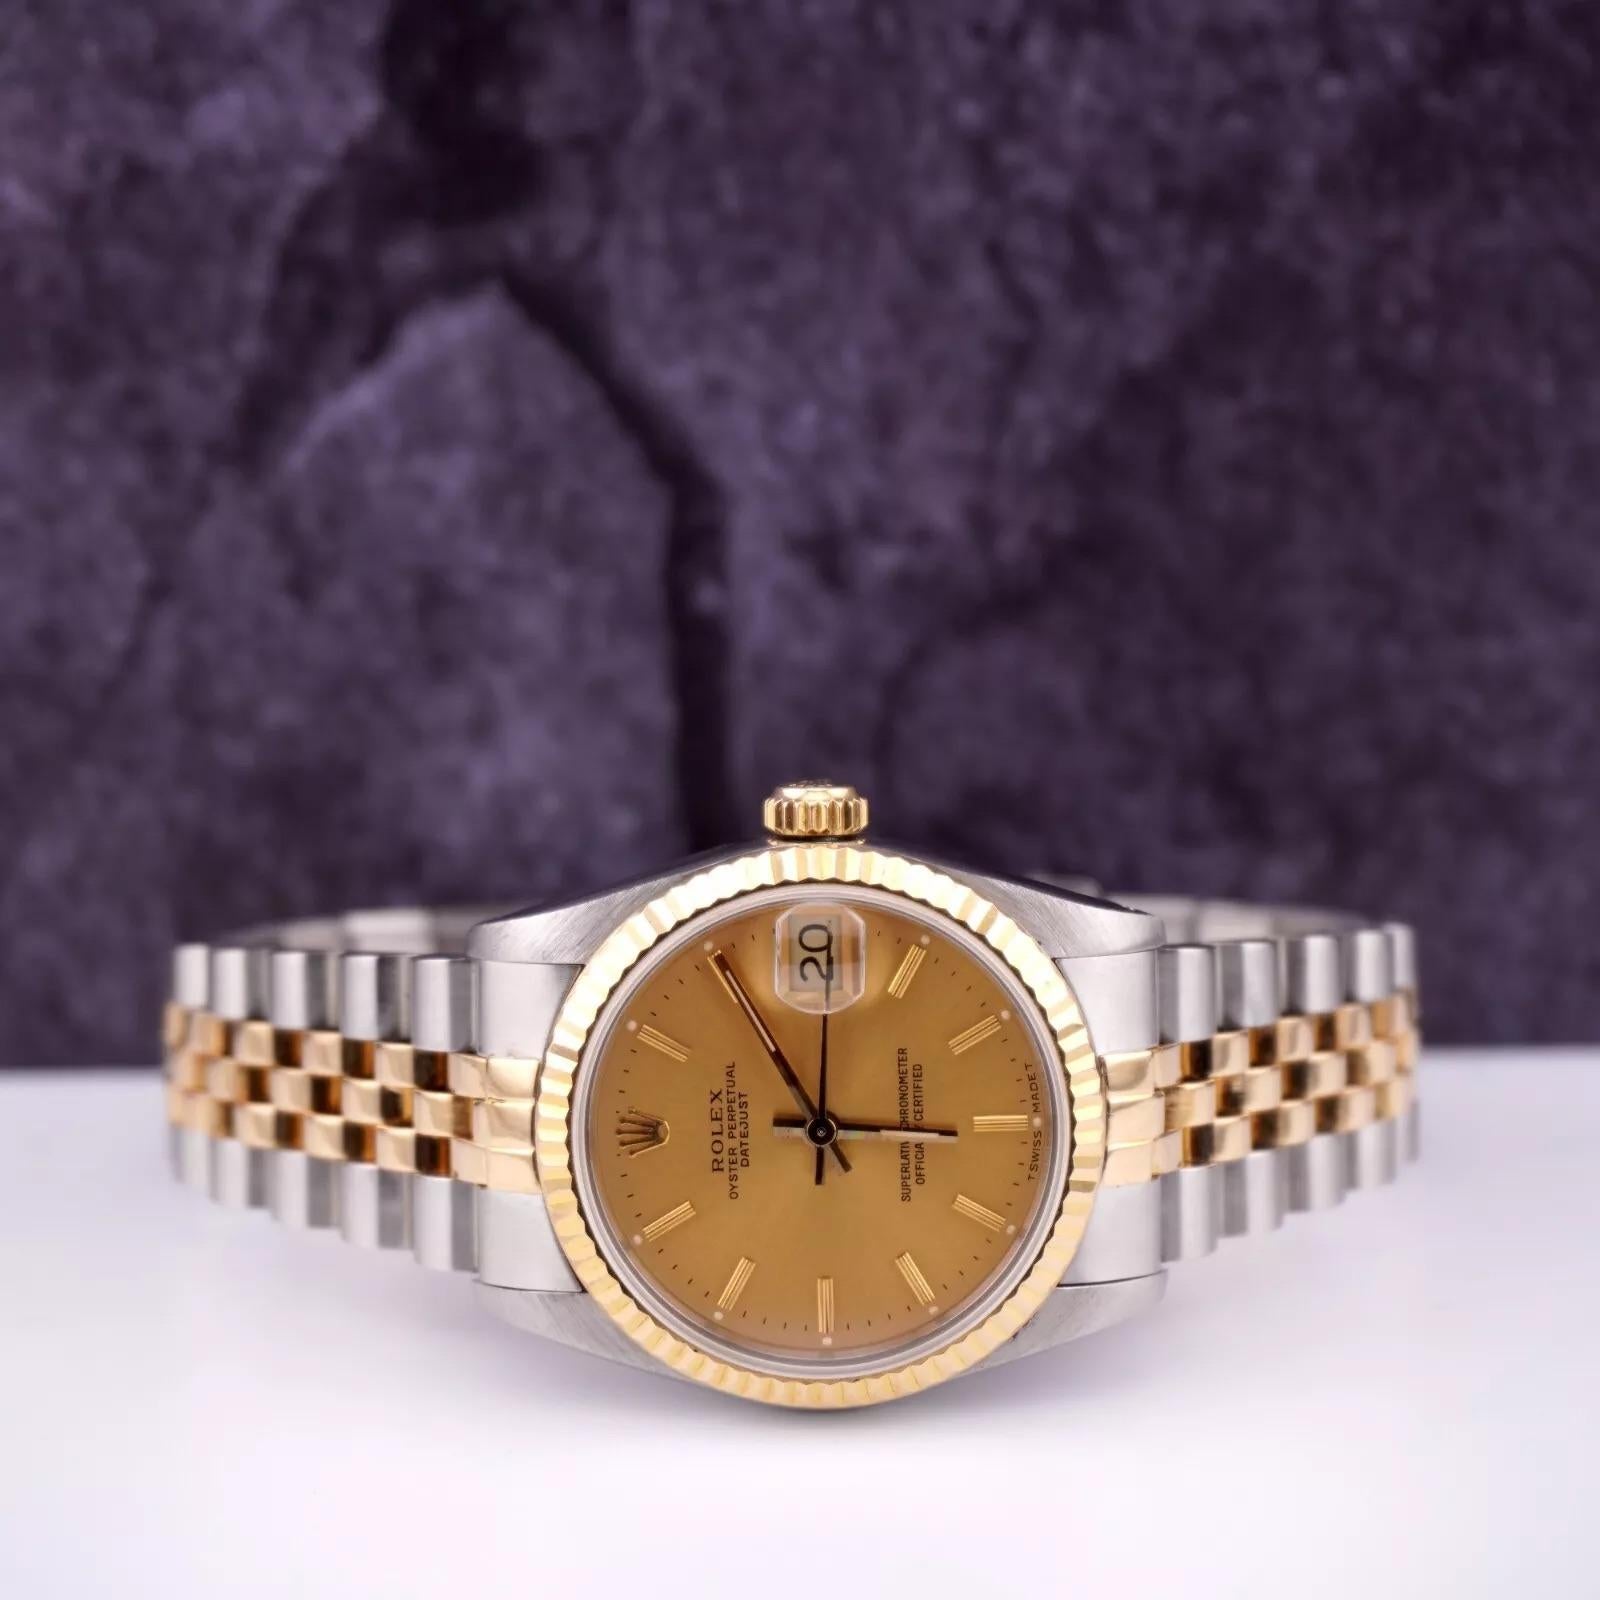 Rolex Datejust 31mm Watch

Pre-owned w/ Original Box & Card
100% Authentic Authenticity Card
Condition - (Great Condition) - See Pics
Watch Reference - 68273
Model - Datejust
Dial Color - Gold
Material - 18k Yellow Gold/Stainless Steel
Watch Will